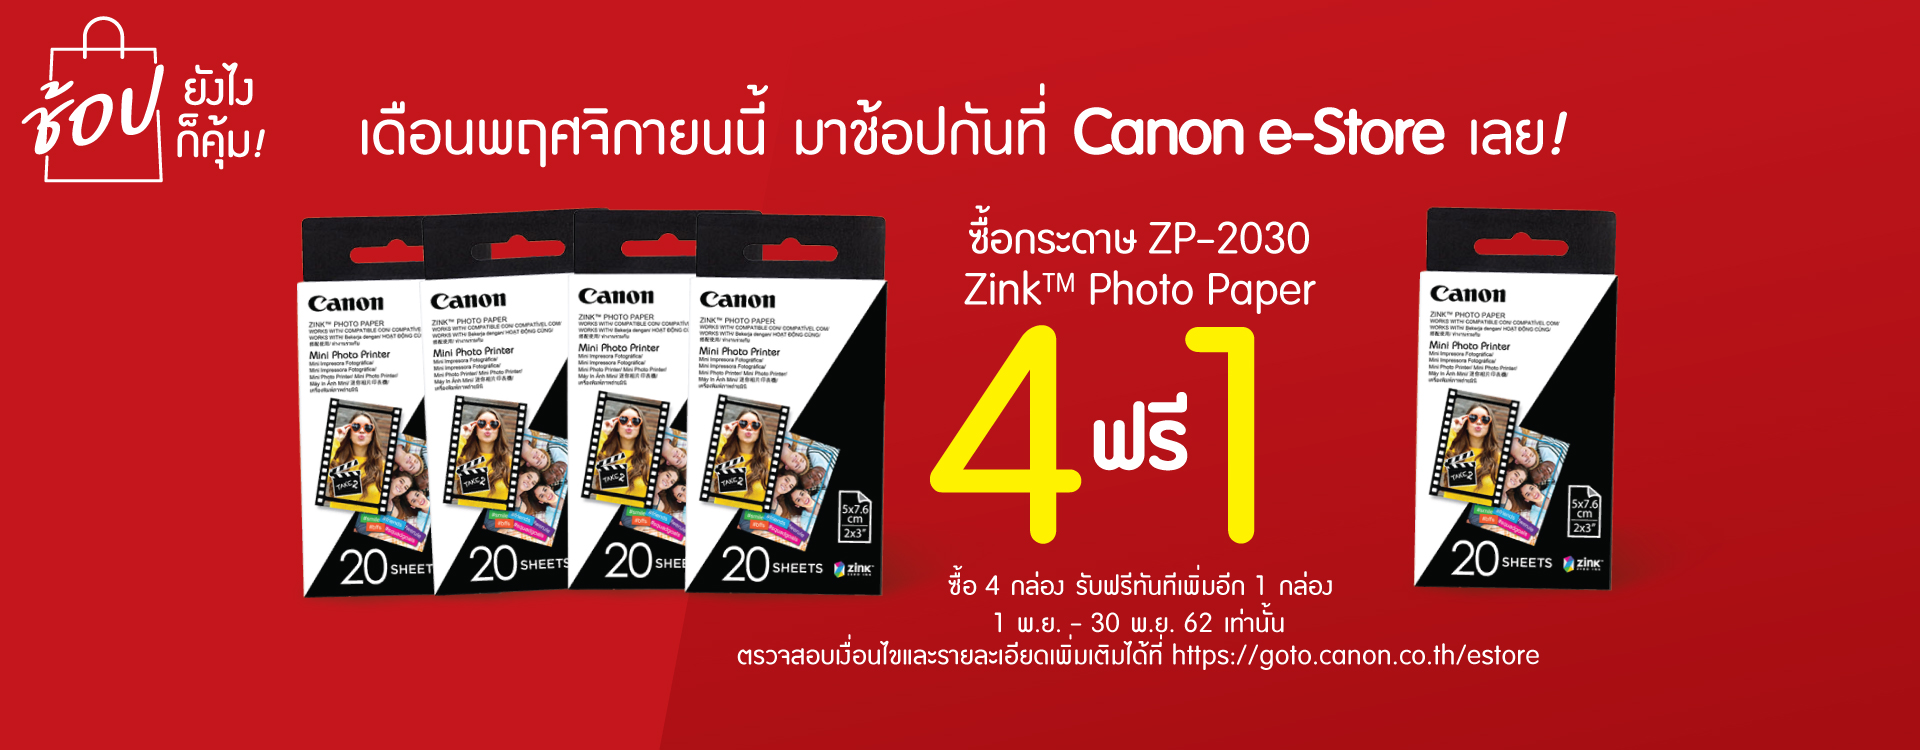 Home Canon Thailand - download mp3 red dress girl roblox wiki 2018 free